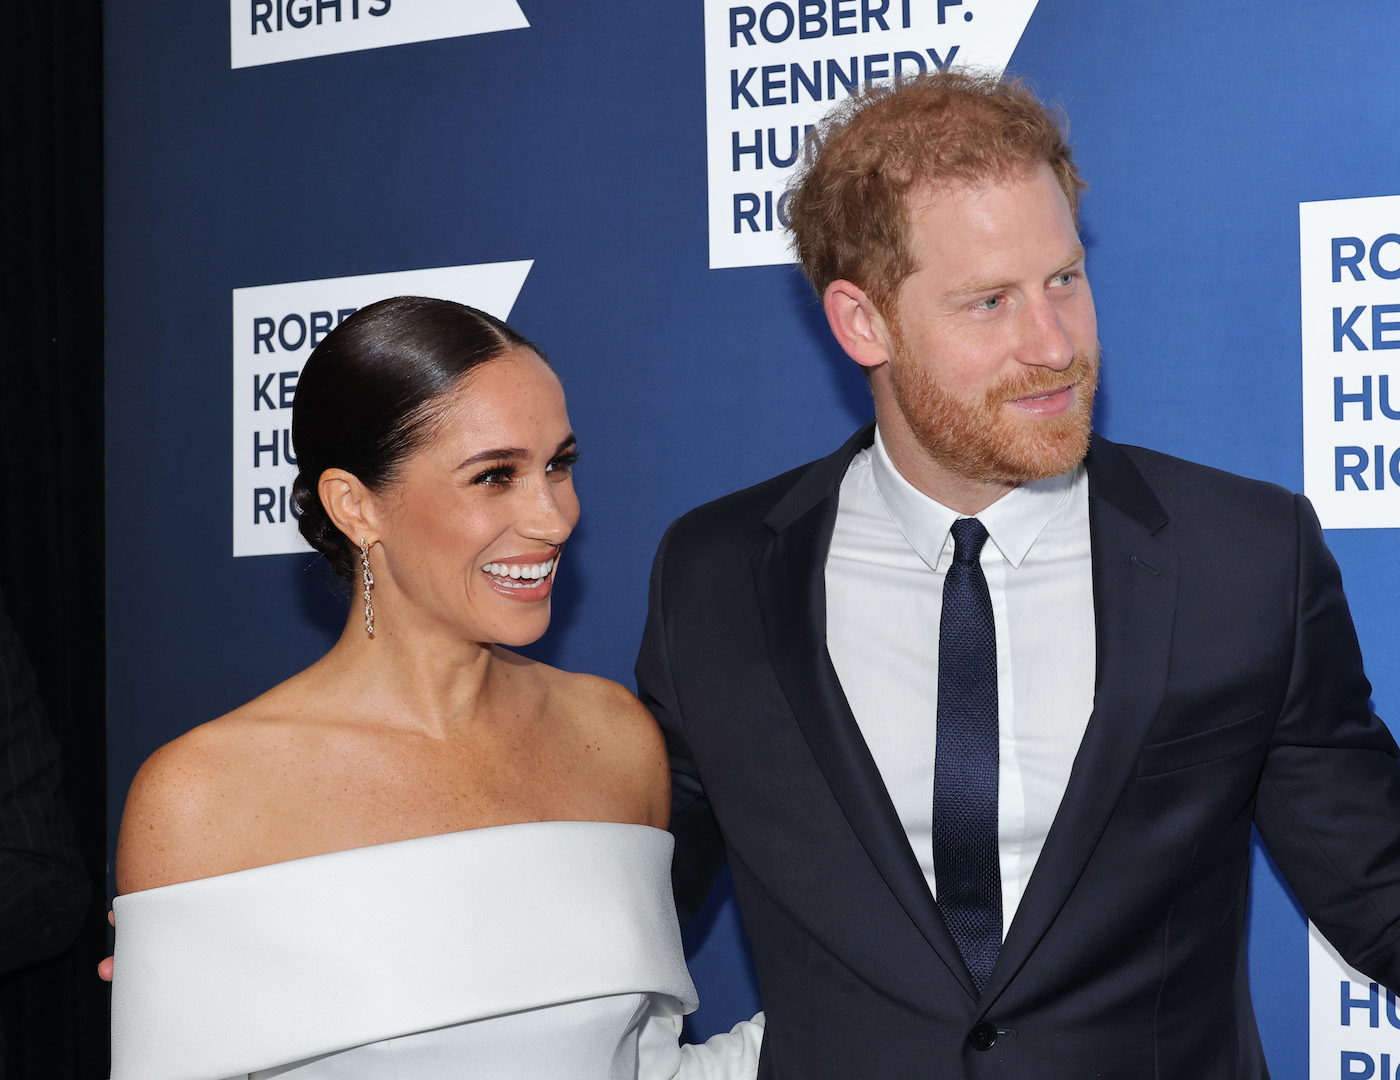 Meghan, Duchess of Sussex, and Prince Harry, Duke of Sussex attended a recent gala